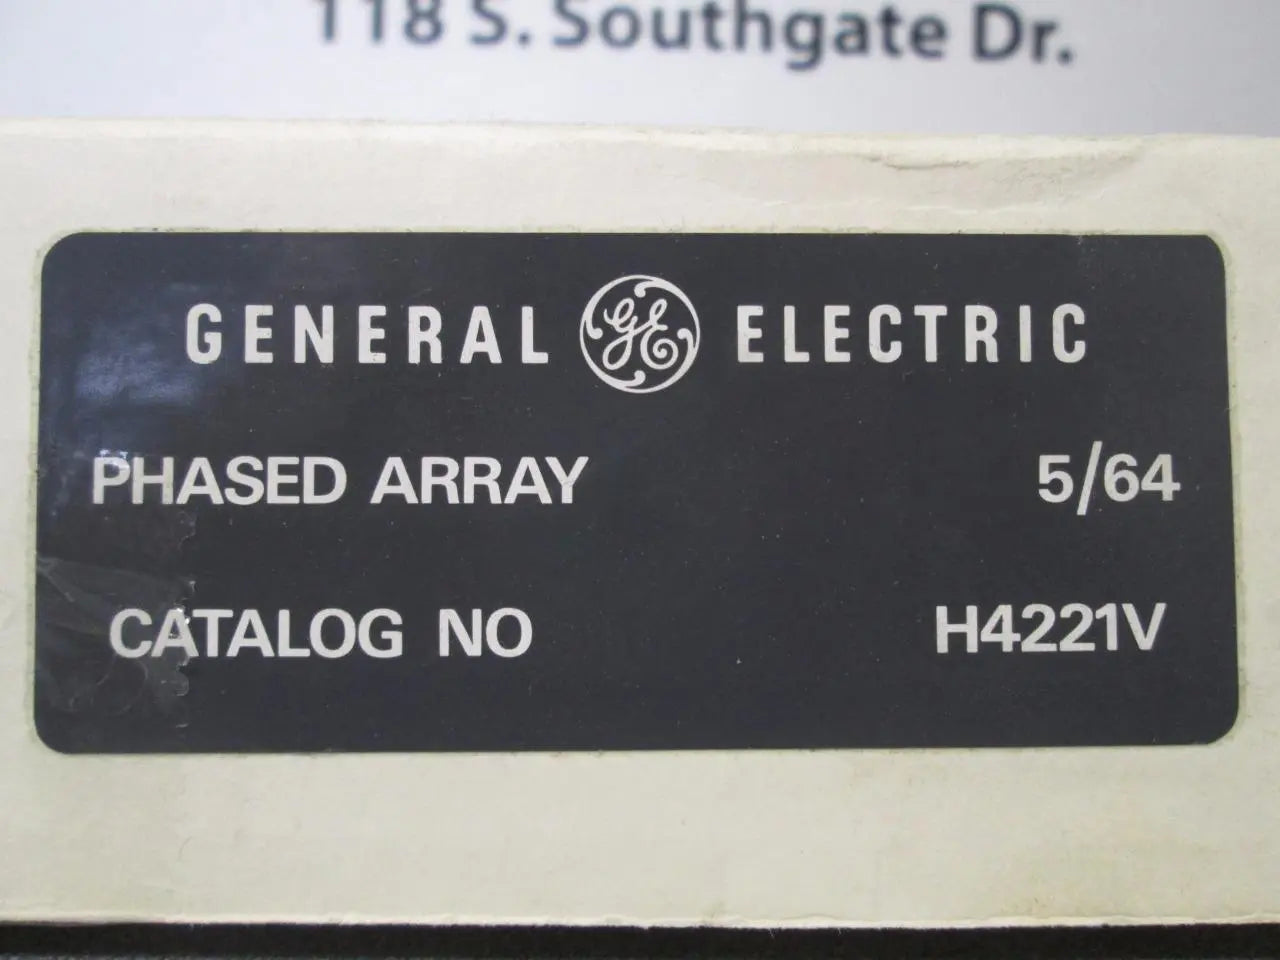 GE General Electric 46-267246G1 (5/64) 5.0 MHZ Ultra Sound Transducer Probe